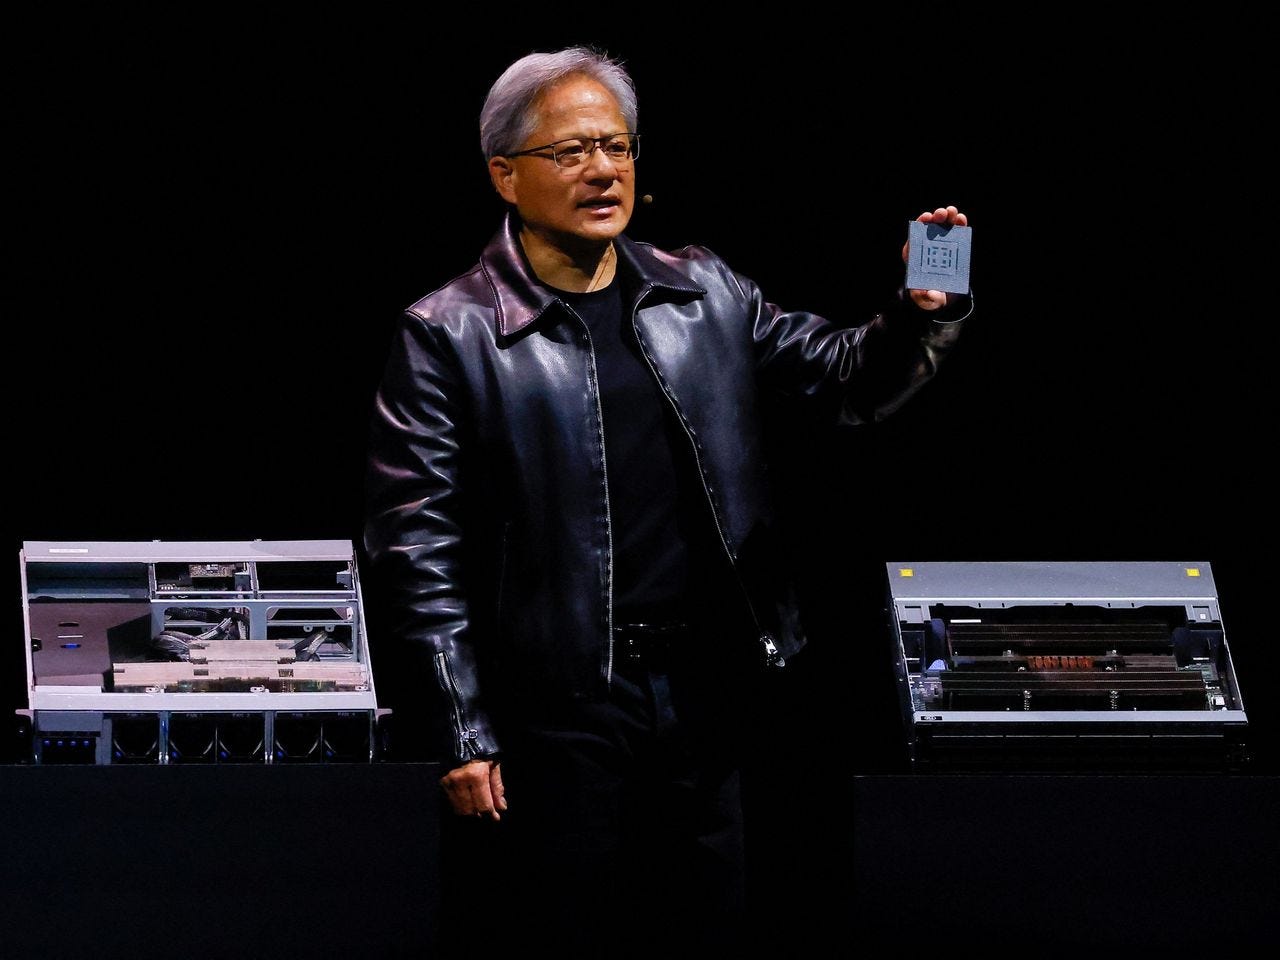 Nvidia Supply Concerns Ease, but Long-Term Challenges Remain - WSJ